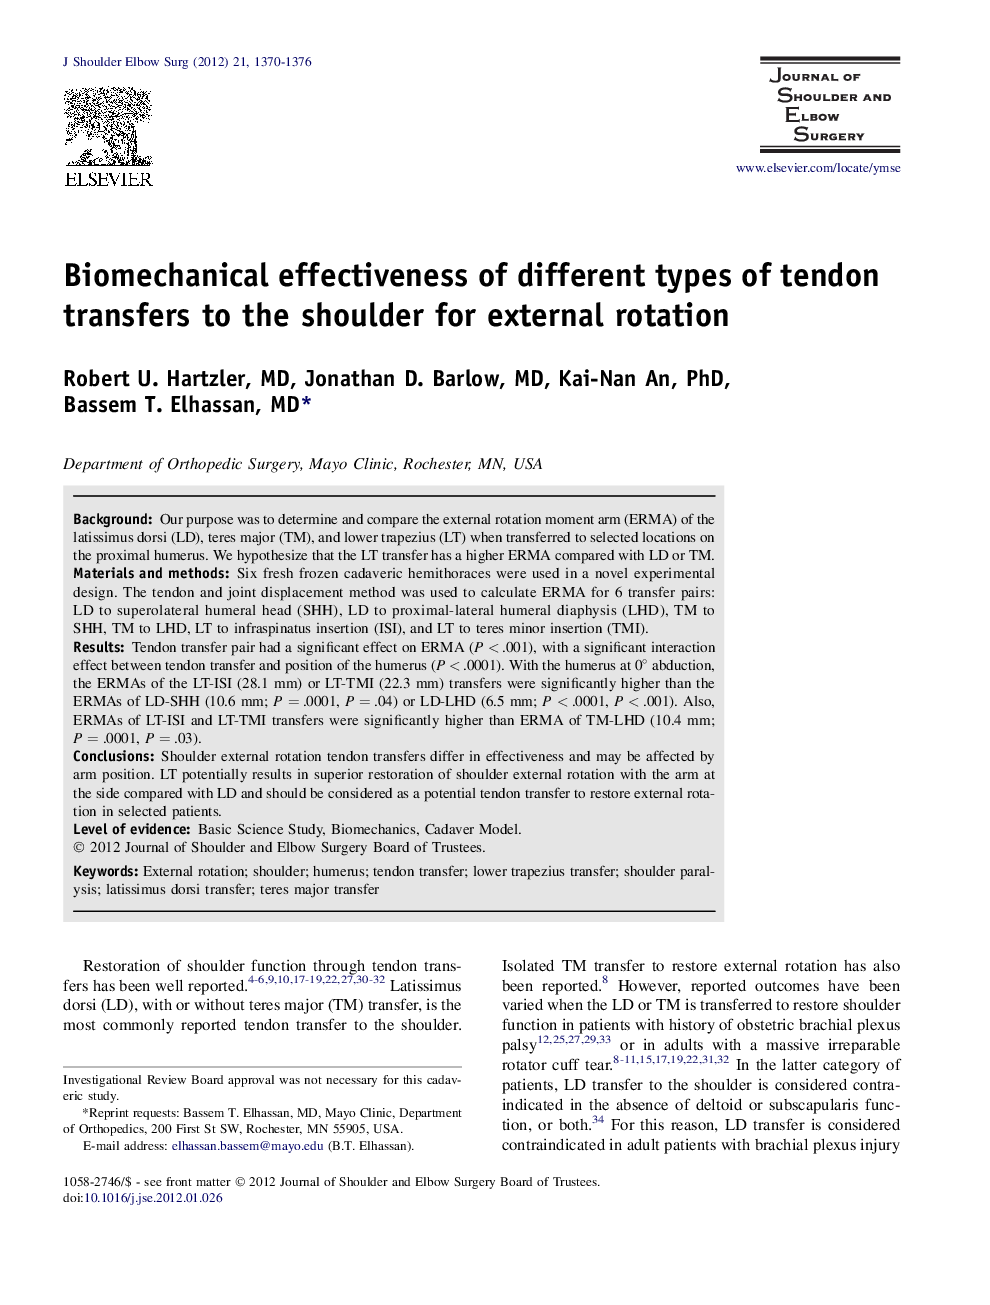 Biomechanical effectiveness of different types of tendon transfers to the shoulder for external rotation 